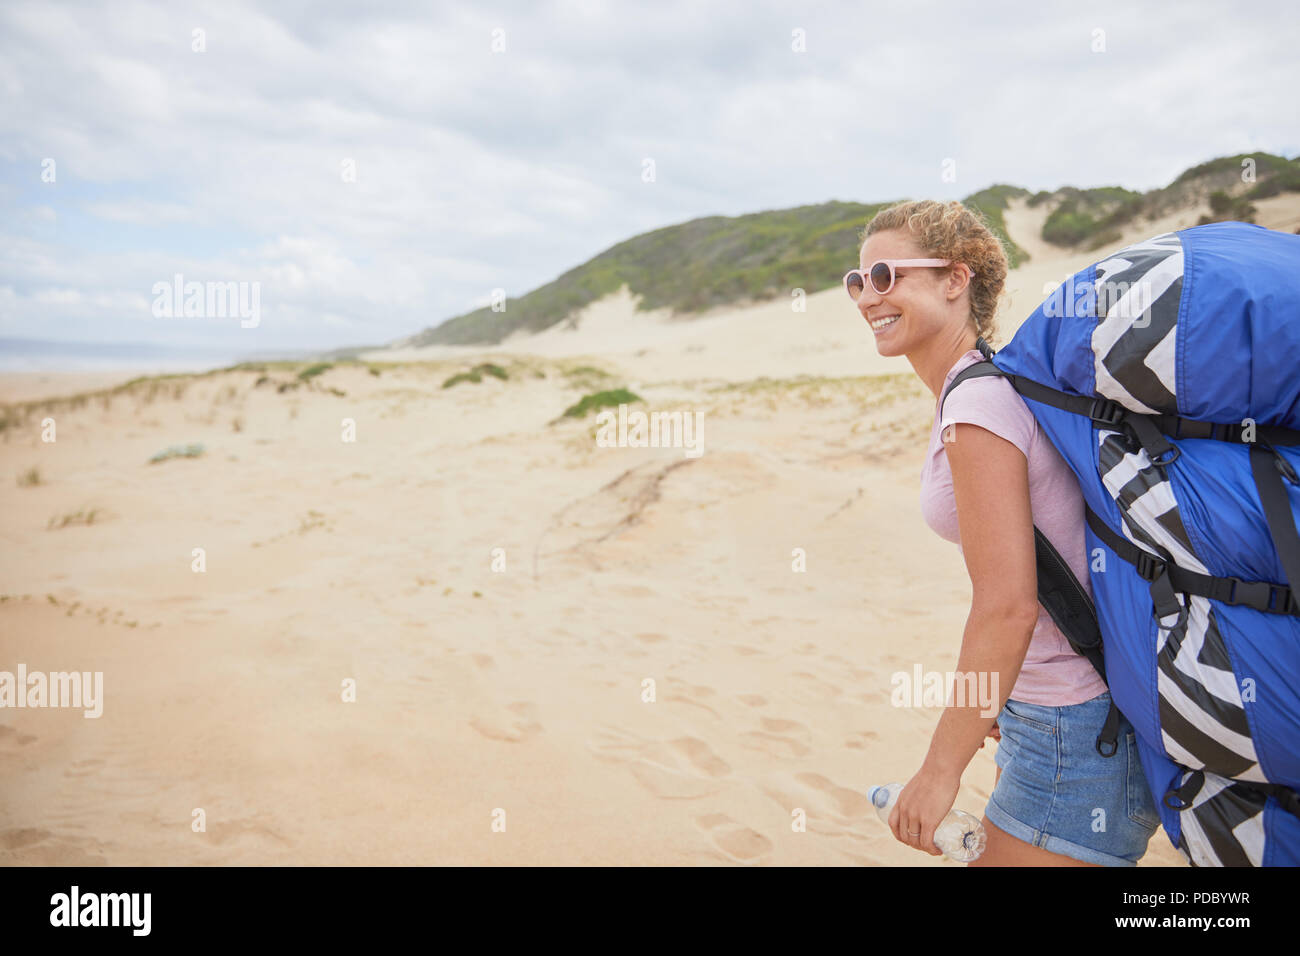 Smiling female paraglider with parachute backpack on beach Stock Photo